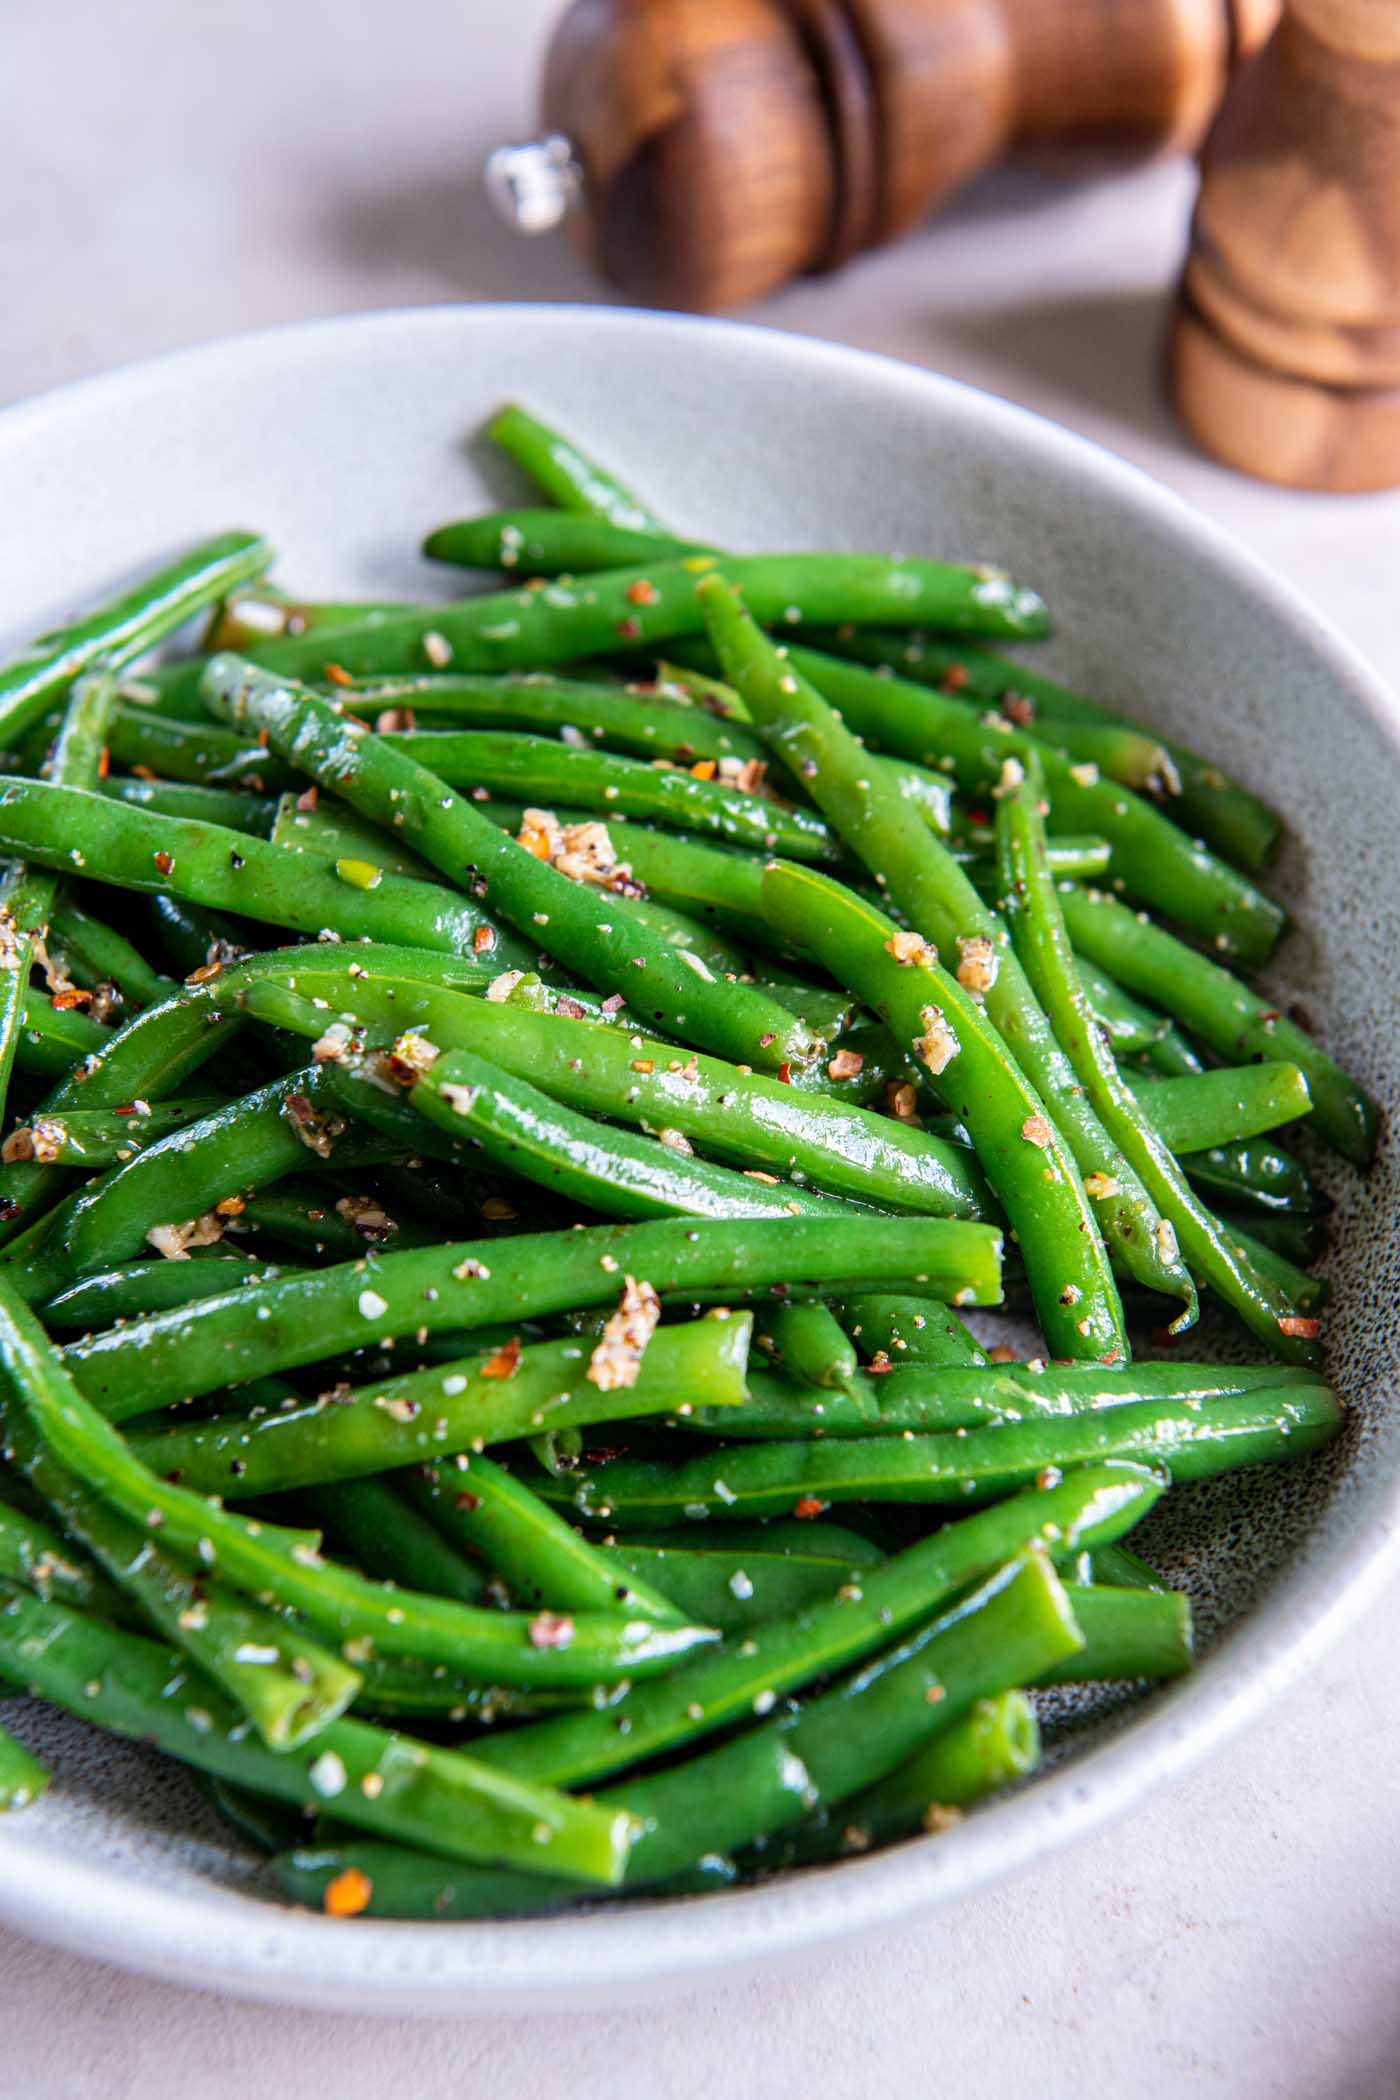 Sauteed green beans with garlic and red pepper flakes in a serving bowl.